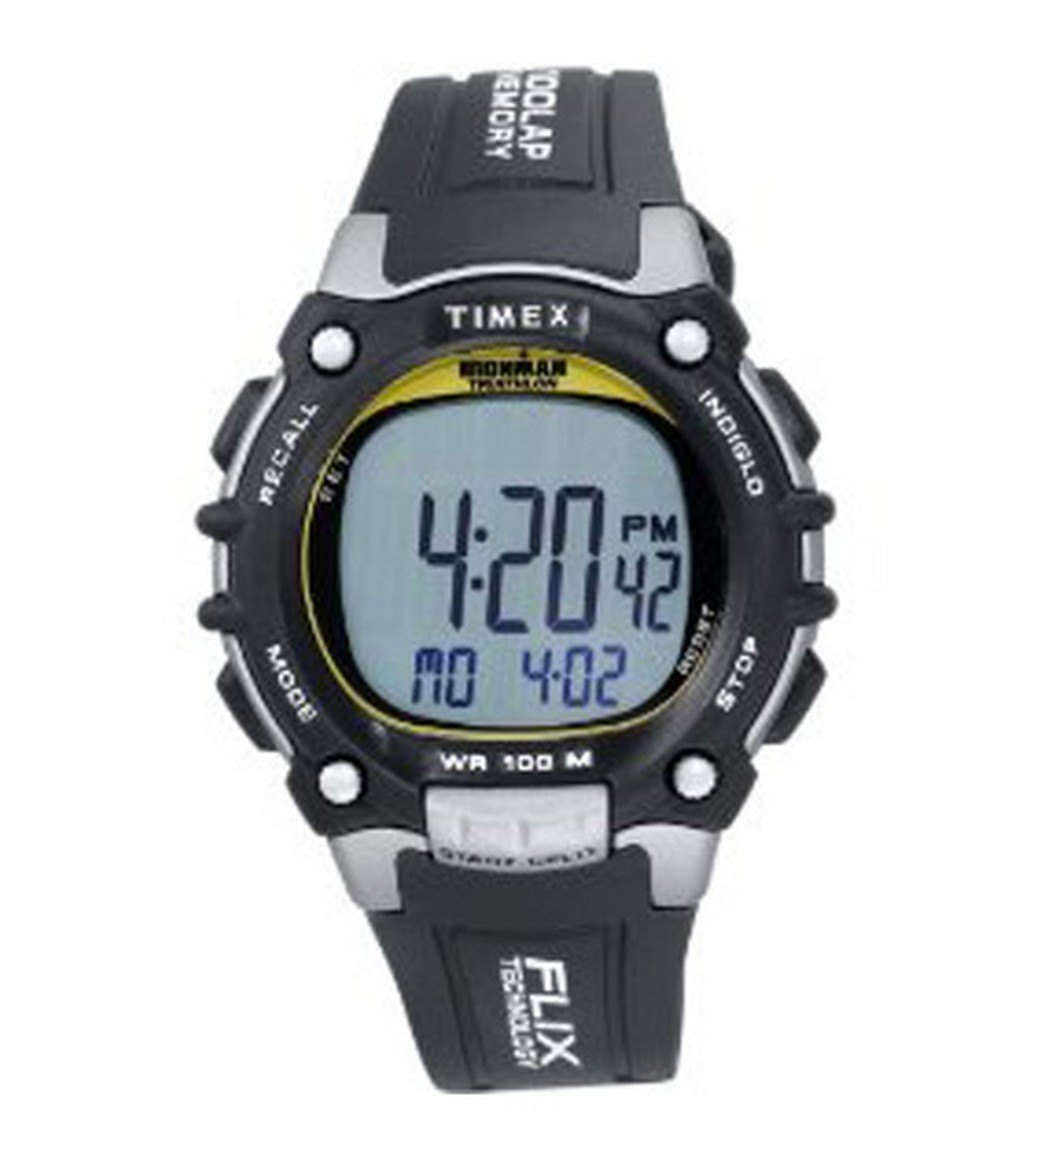 Timex Ironman Classic 100 Lap Watch - Full Size Black Rubber - Swimoutlet.com